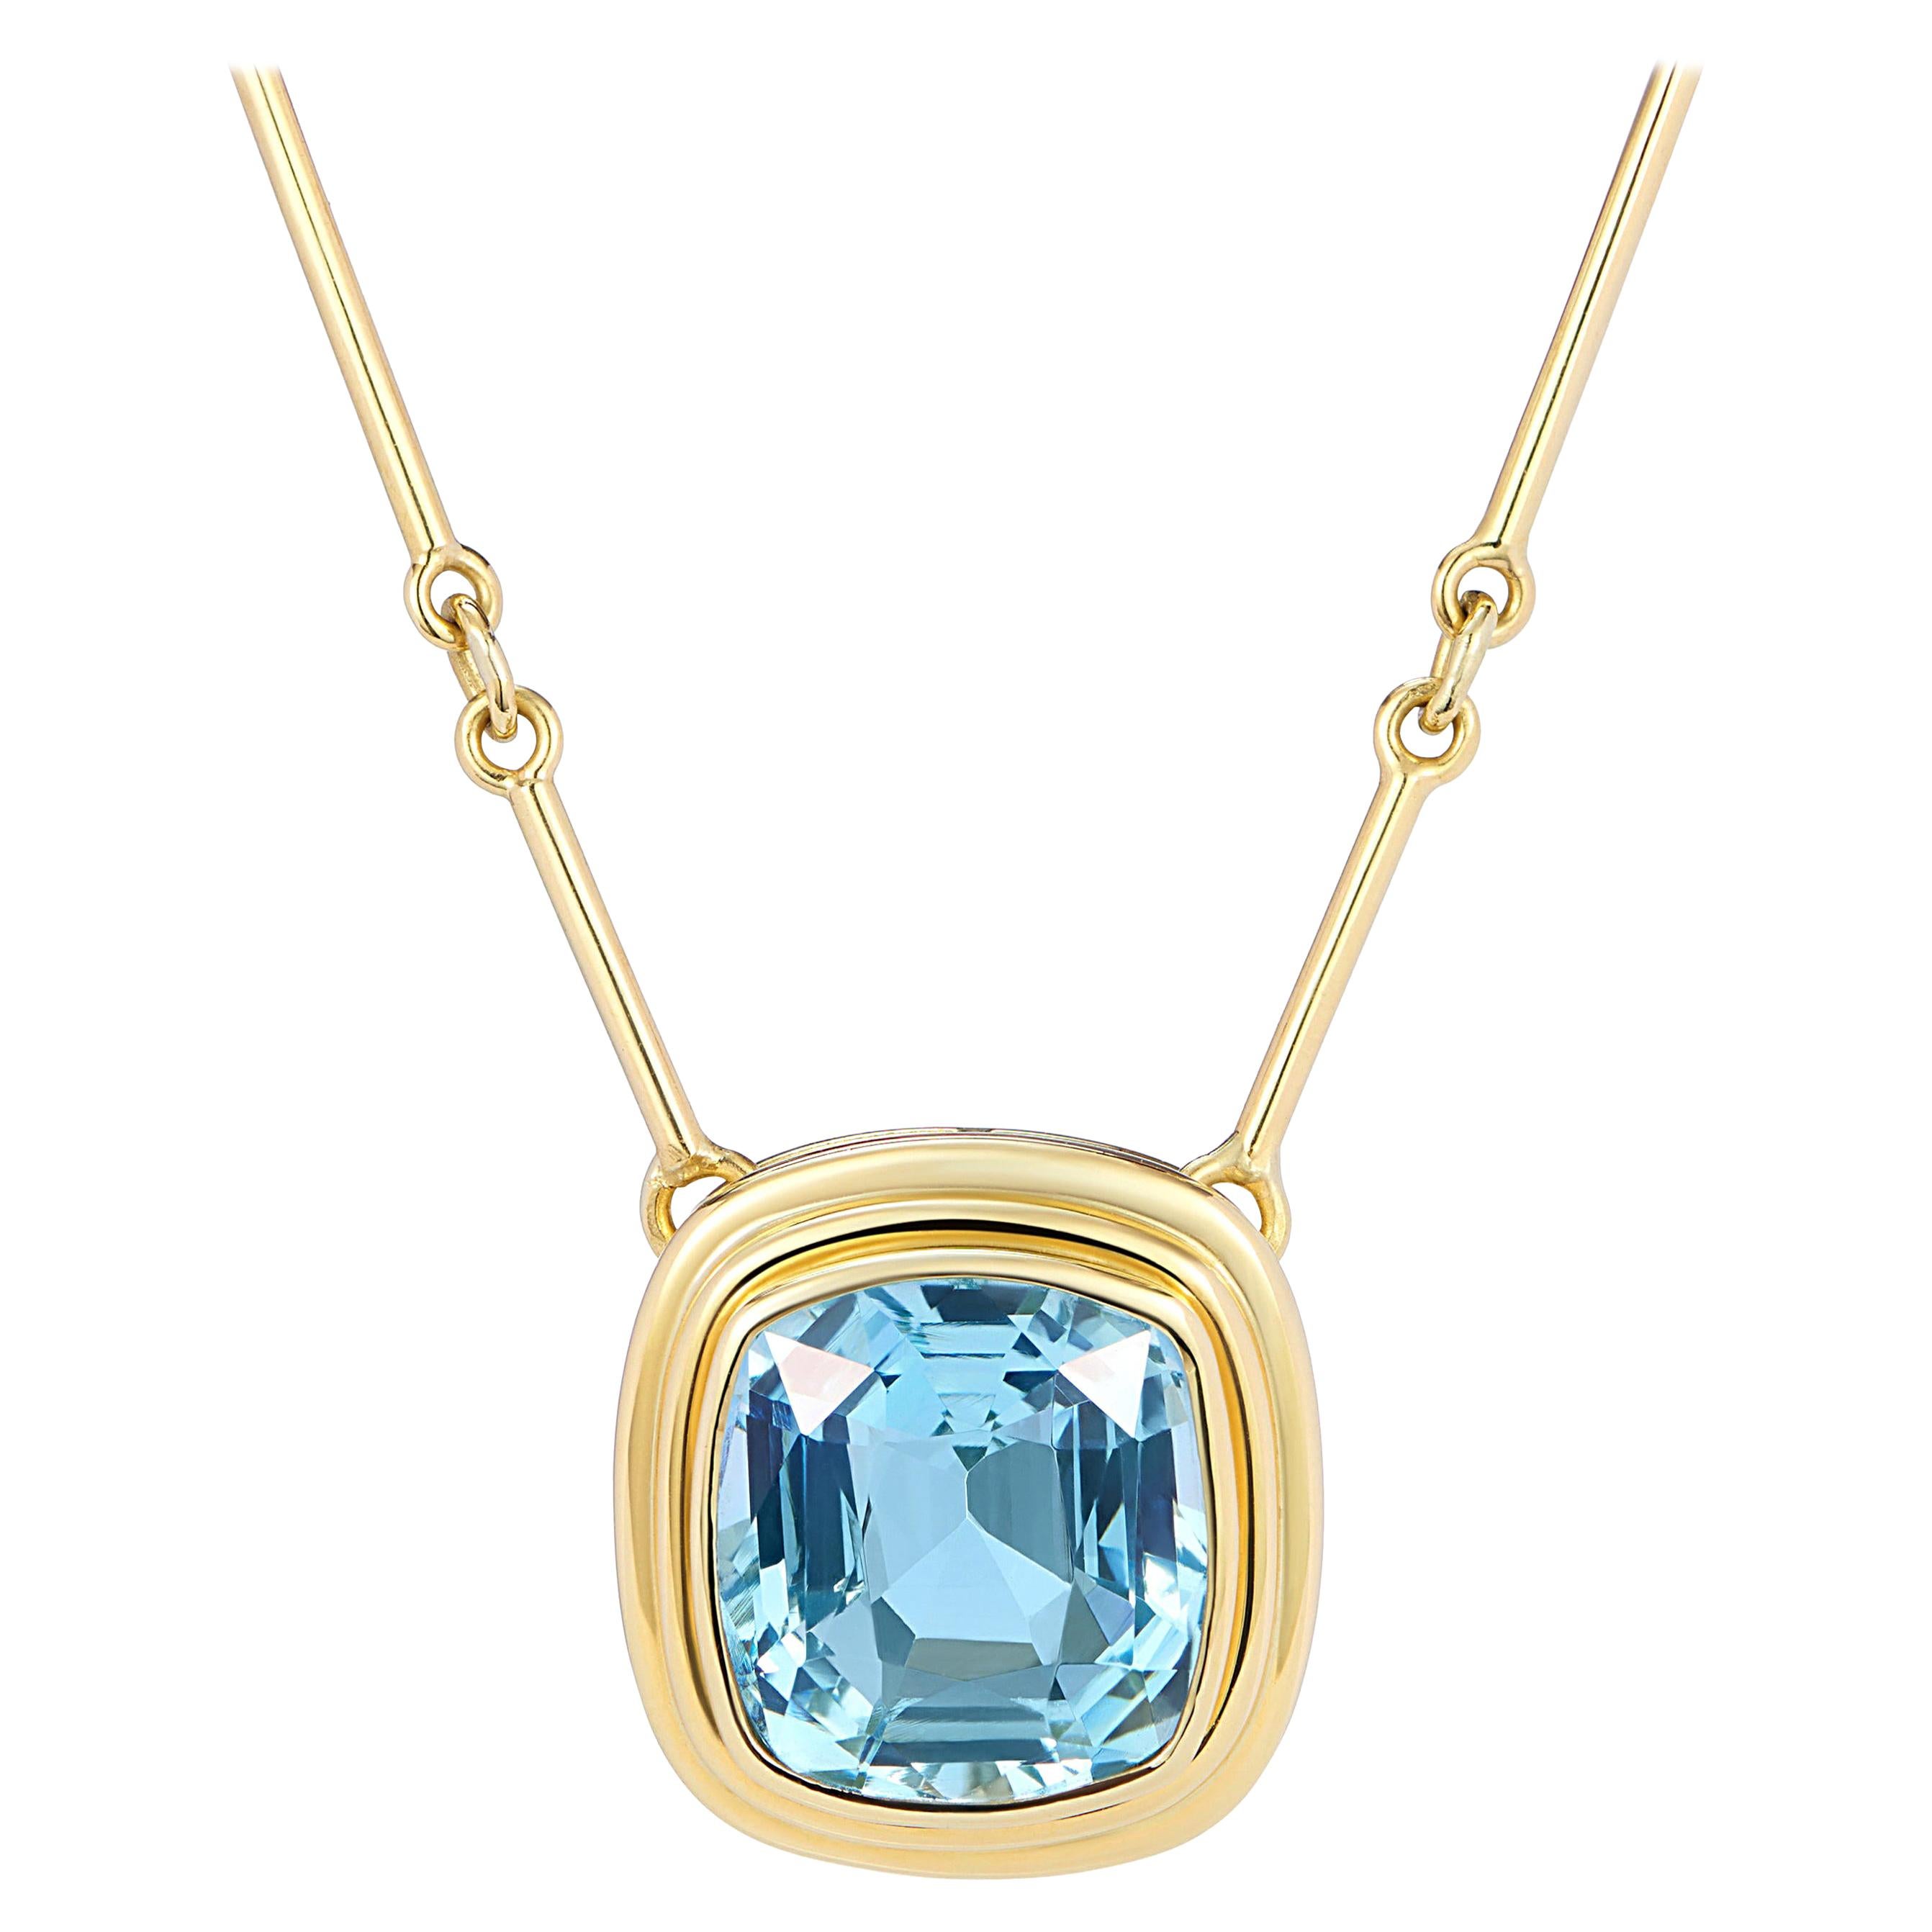 Certified 6.97 Carat Aquamarine Statement Necklace with 18 inch Gold Bar Chain